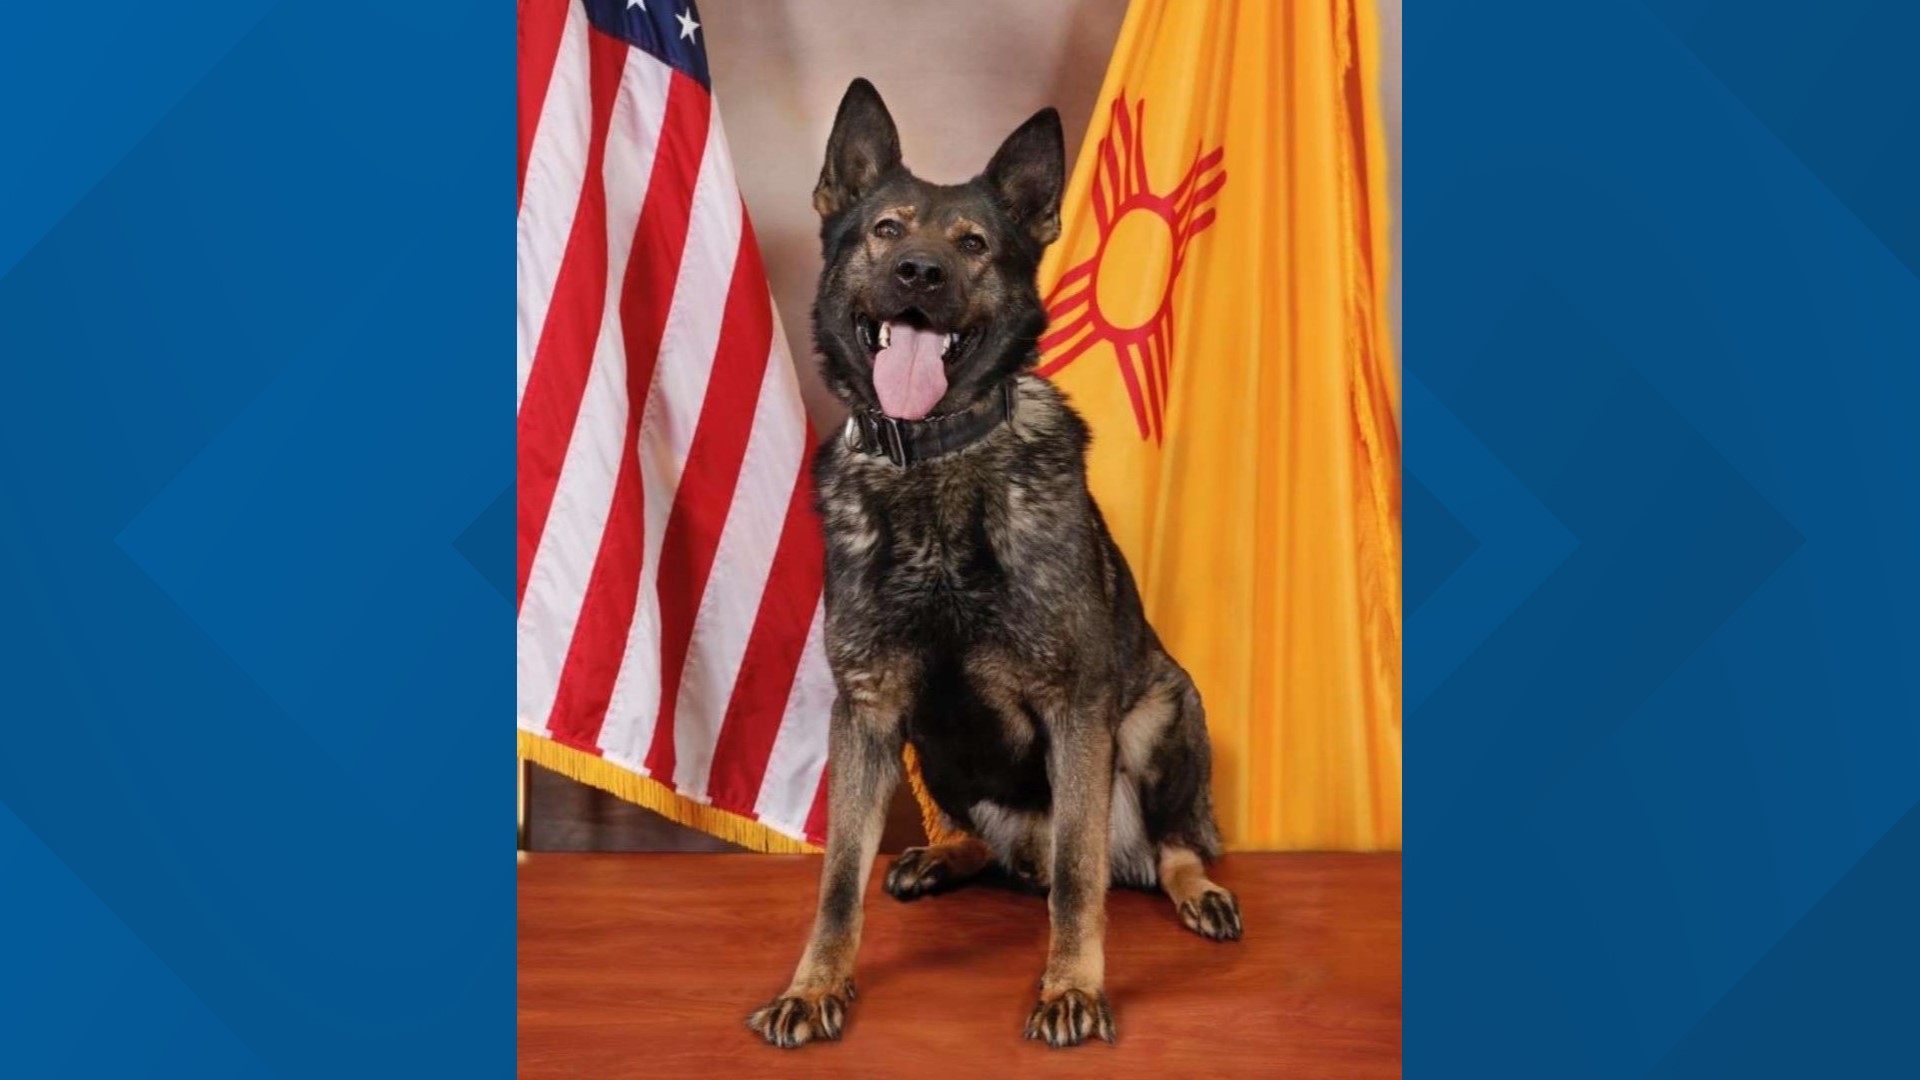 Bady was a trained police K9 in bomb detection, apprehension and tracking alongside his only handler, Sergeant J. Thomas.